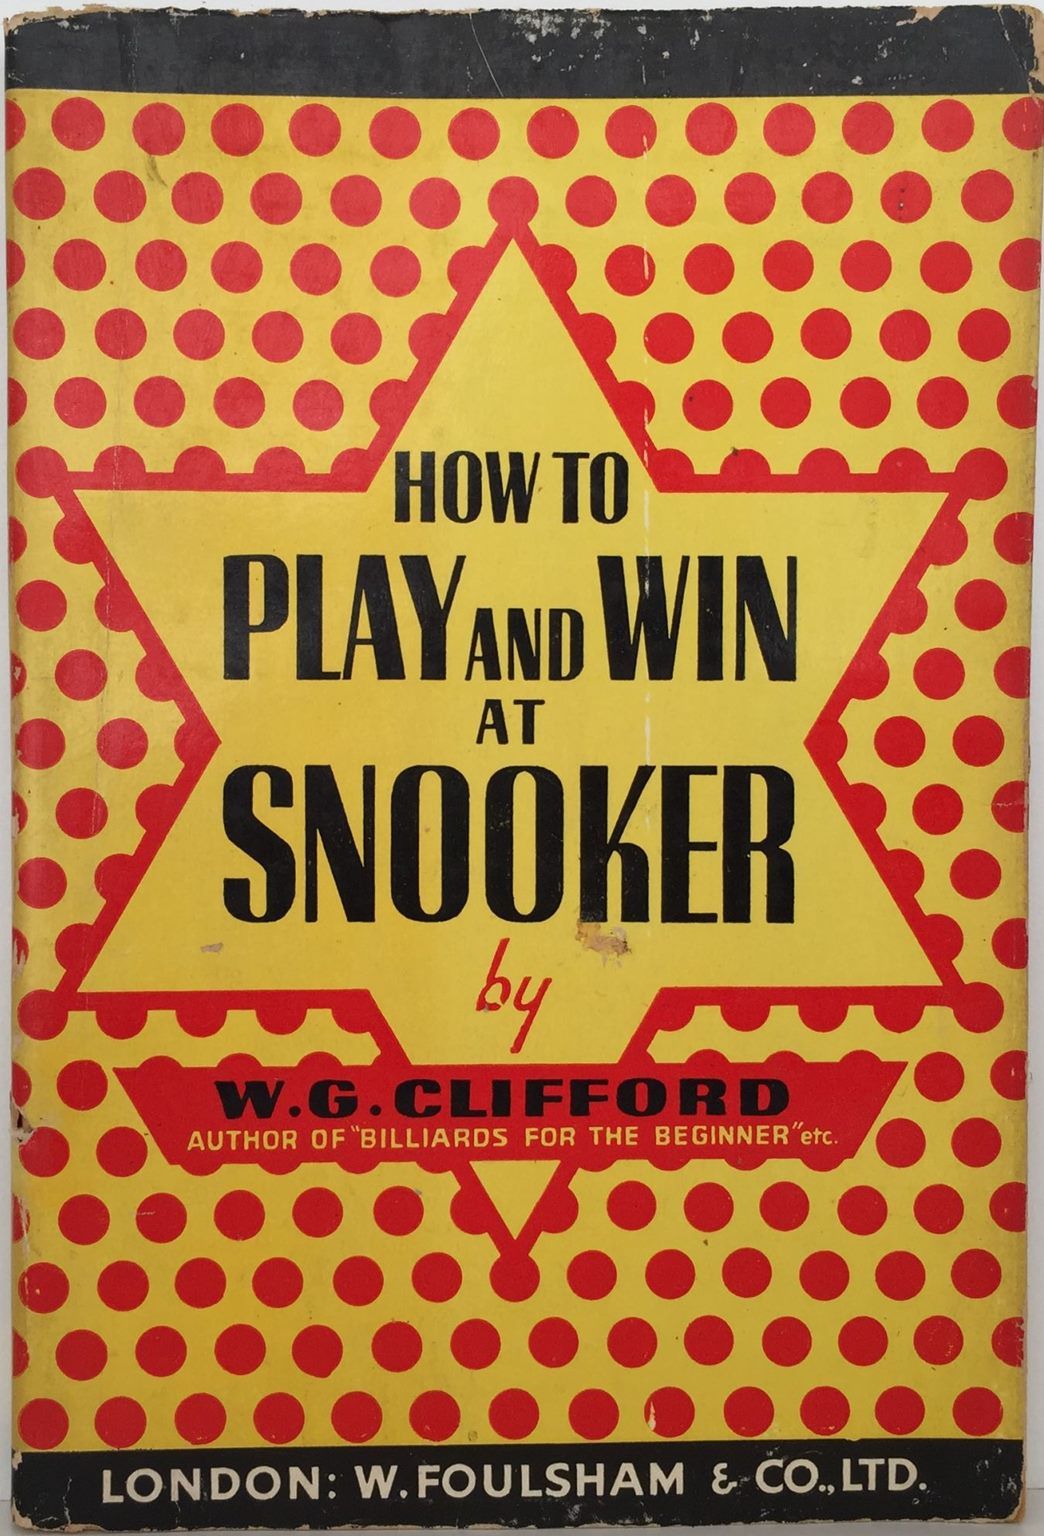 HOW TO PLAY AND WIN AT SNOOKER